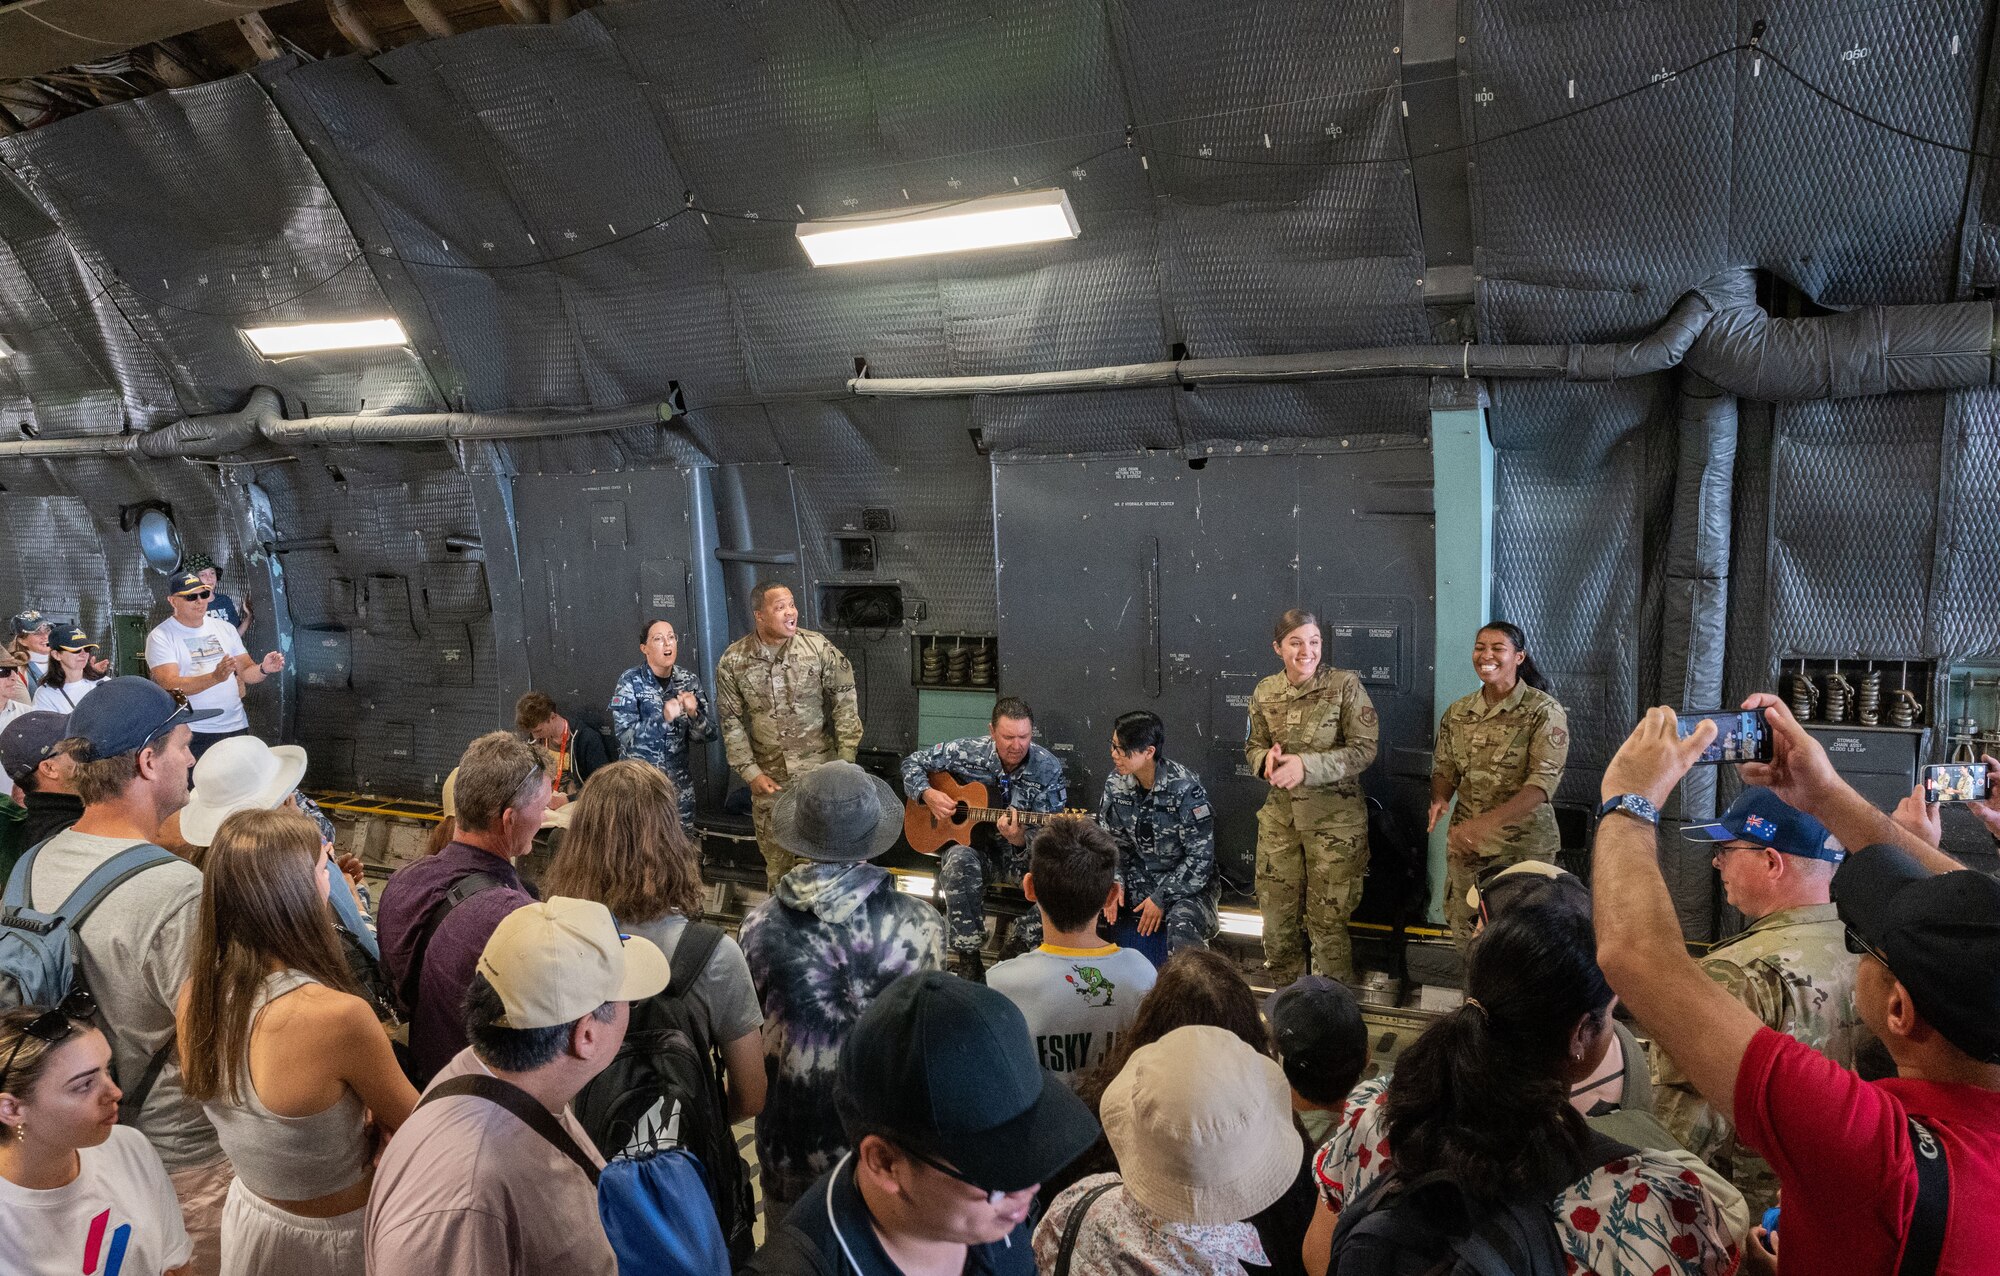 The U.S. Air Force Band of the Pacific-Hawaii performs a song inside the C-5M Super Galaxy static display at the 2023 Australian International Airshow and Aerospace & Defence Exposition—AVALON 23—at Avalon International Airport, March 4, 2023. Our steadfast relationship with Australia, deeply rooted in our common principles and shared values, stems from working together day in and day out across the full spectrum of operations and will continue to prosper as we further integrate our efforts through events such as AVALON 23. Through the power and energy of music, the Band of the Pacific’s impressive performances create engaging moments that serve as a demonstration of the excellence displayed by the 46,000 Airmen serving, stationed and deployed throughout the Indo-Pacific. (U.S. Air Force photo by Tech. Sgt. Hailey Haux)